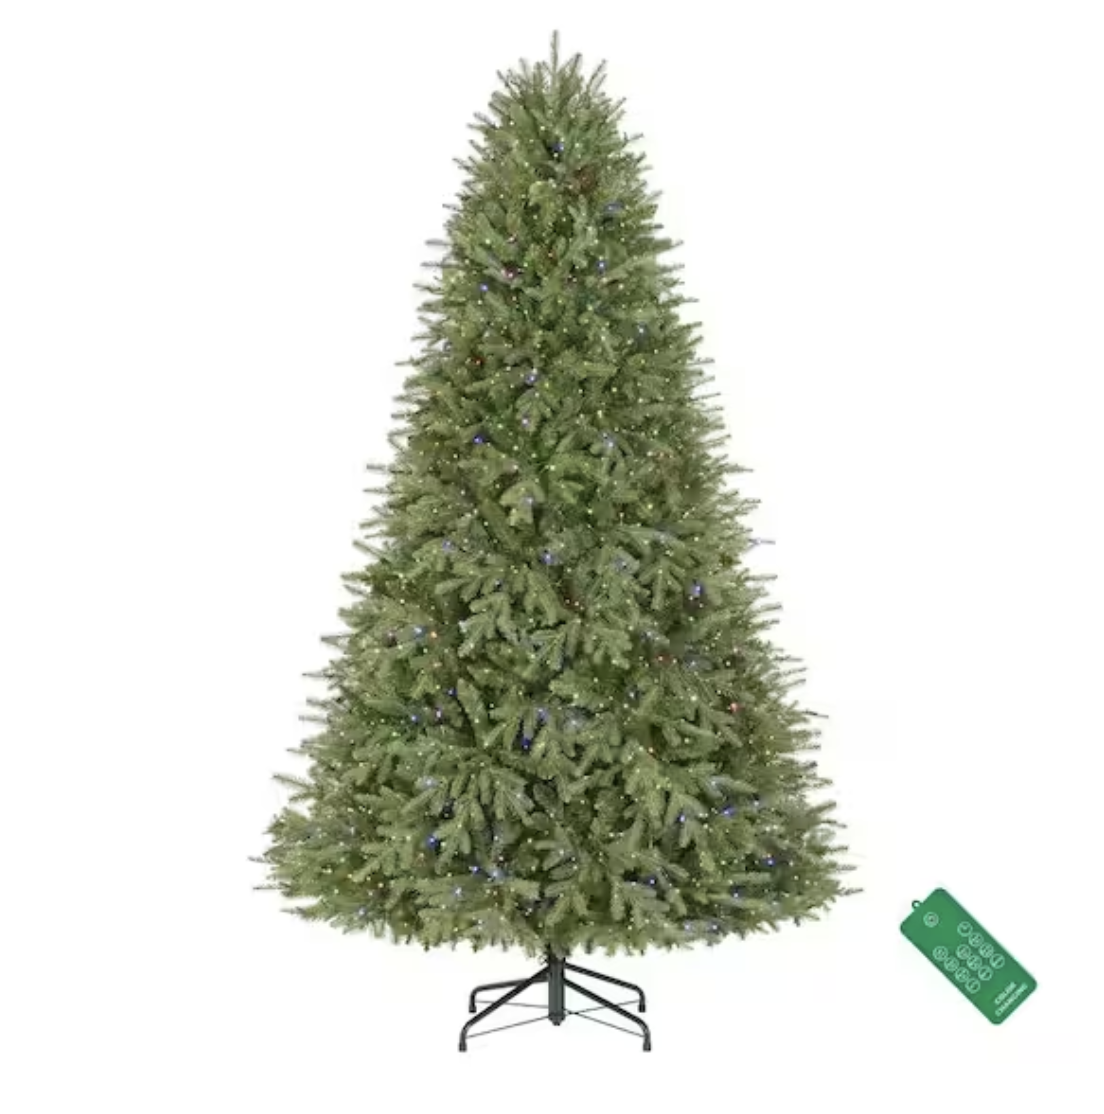 The Home Depot viral Christmas tree is back in stock for a limited